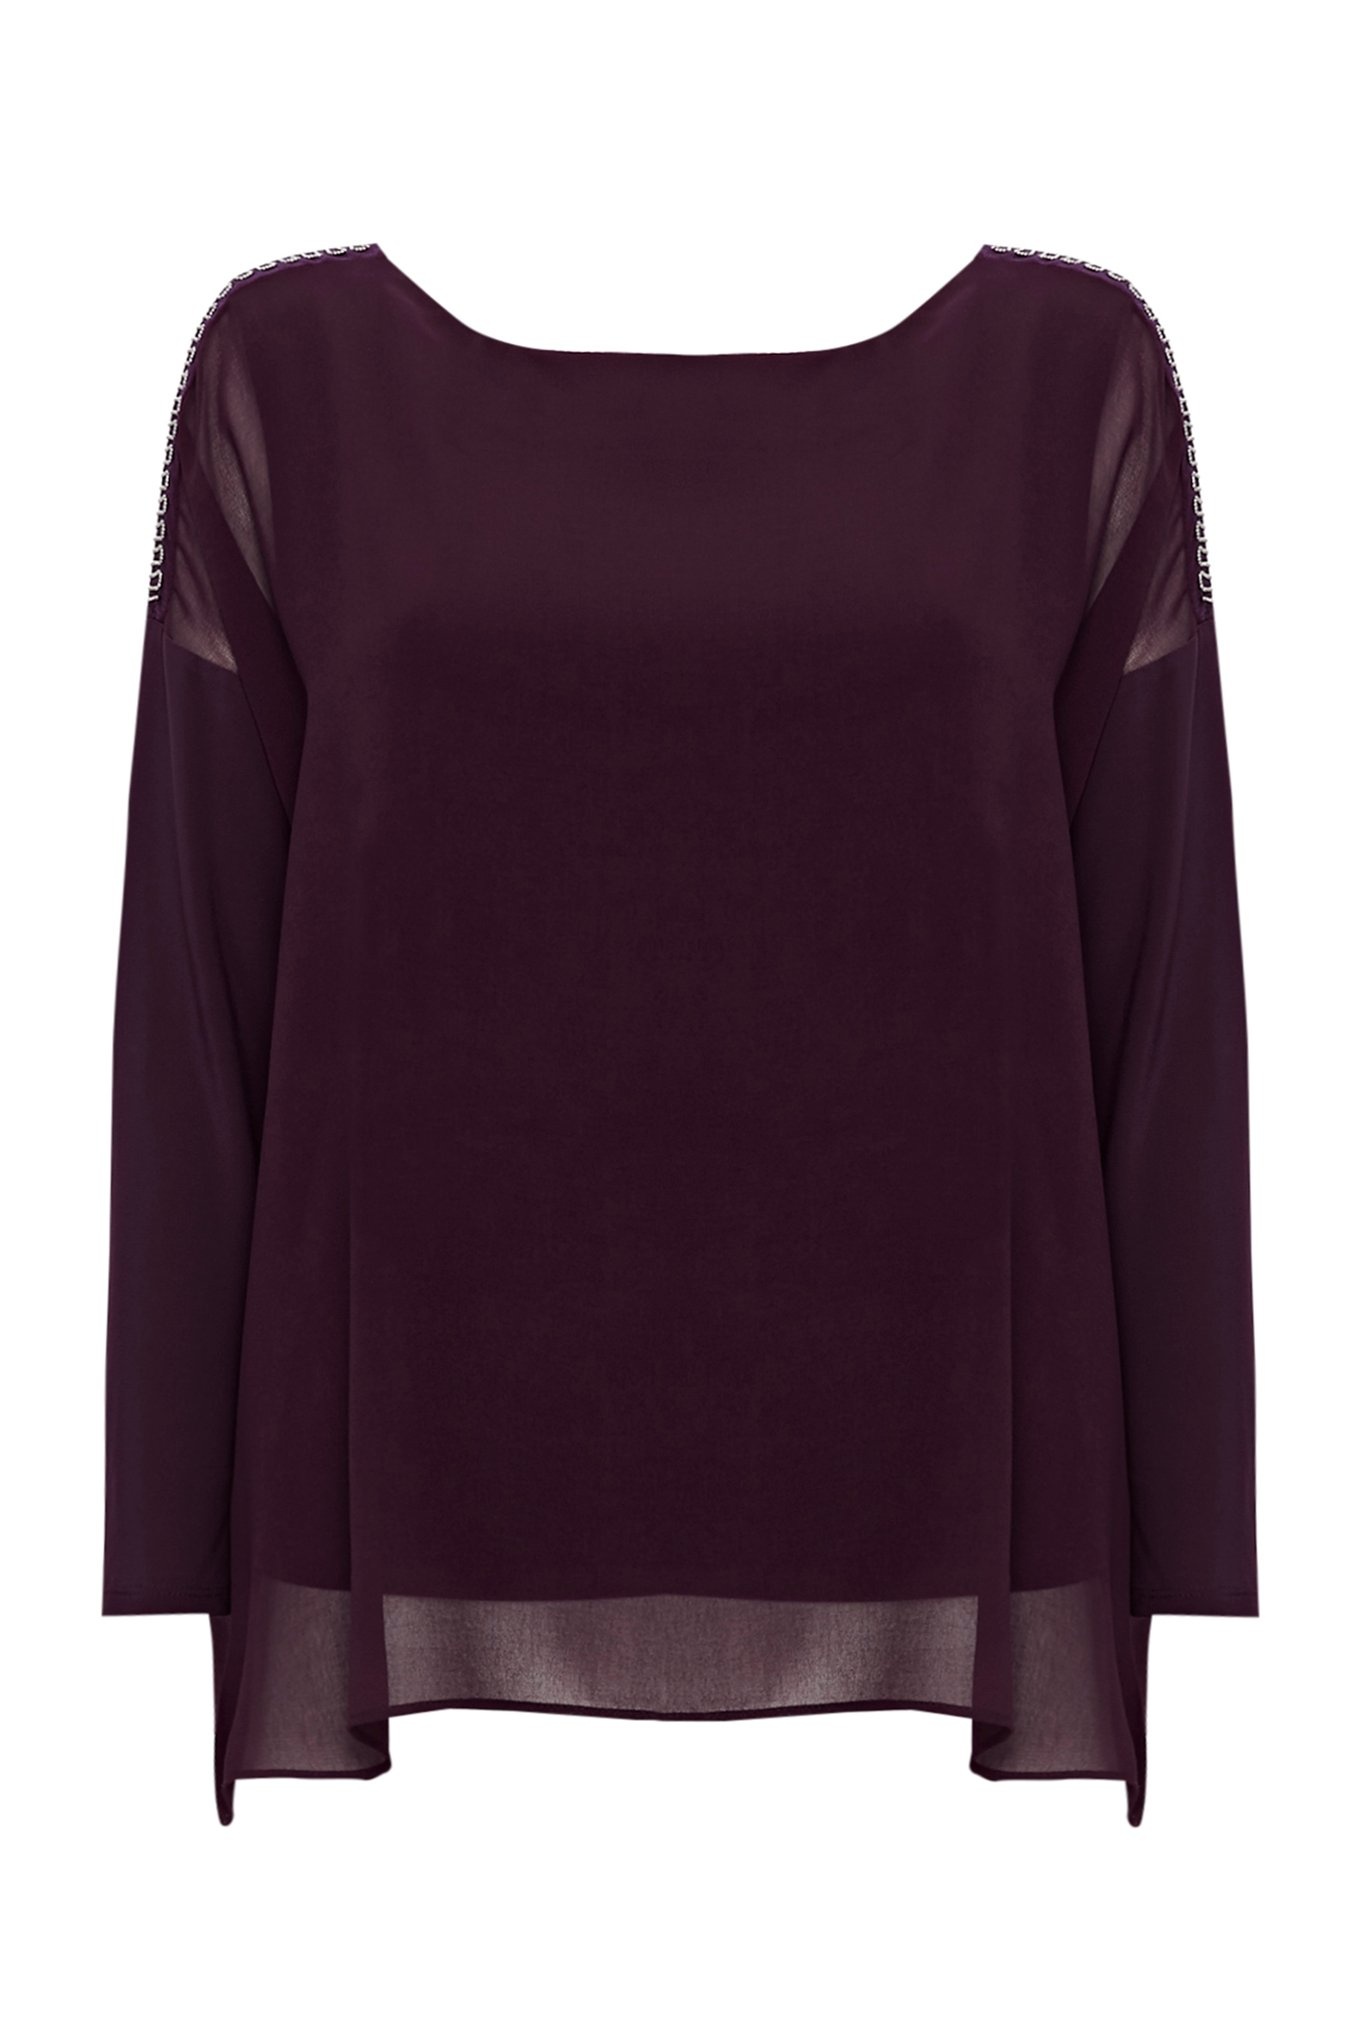 Petite Berry Embellished Overlay Blouse - Hello! We are wt+